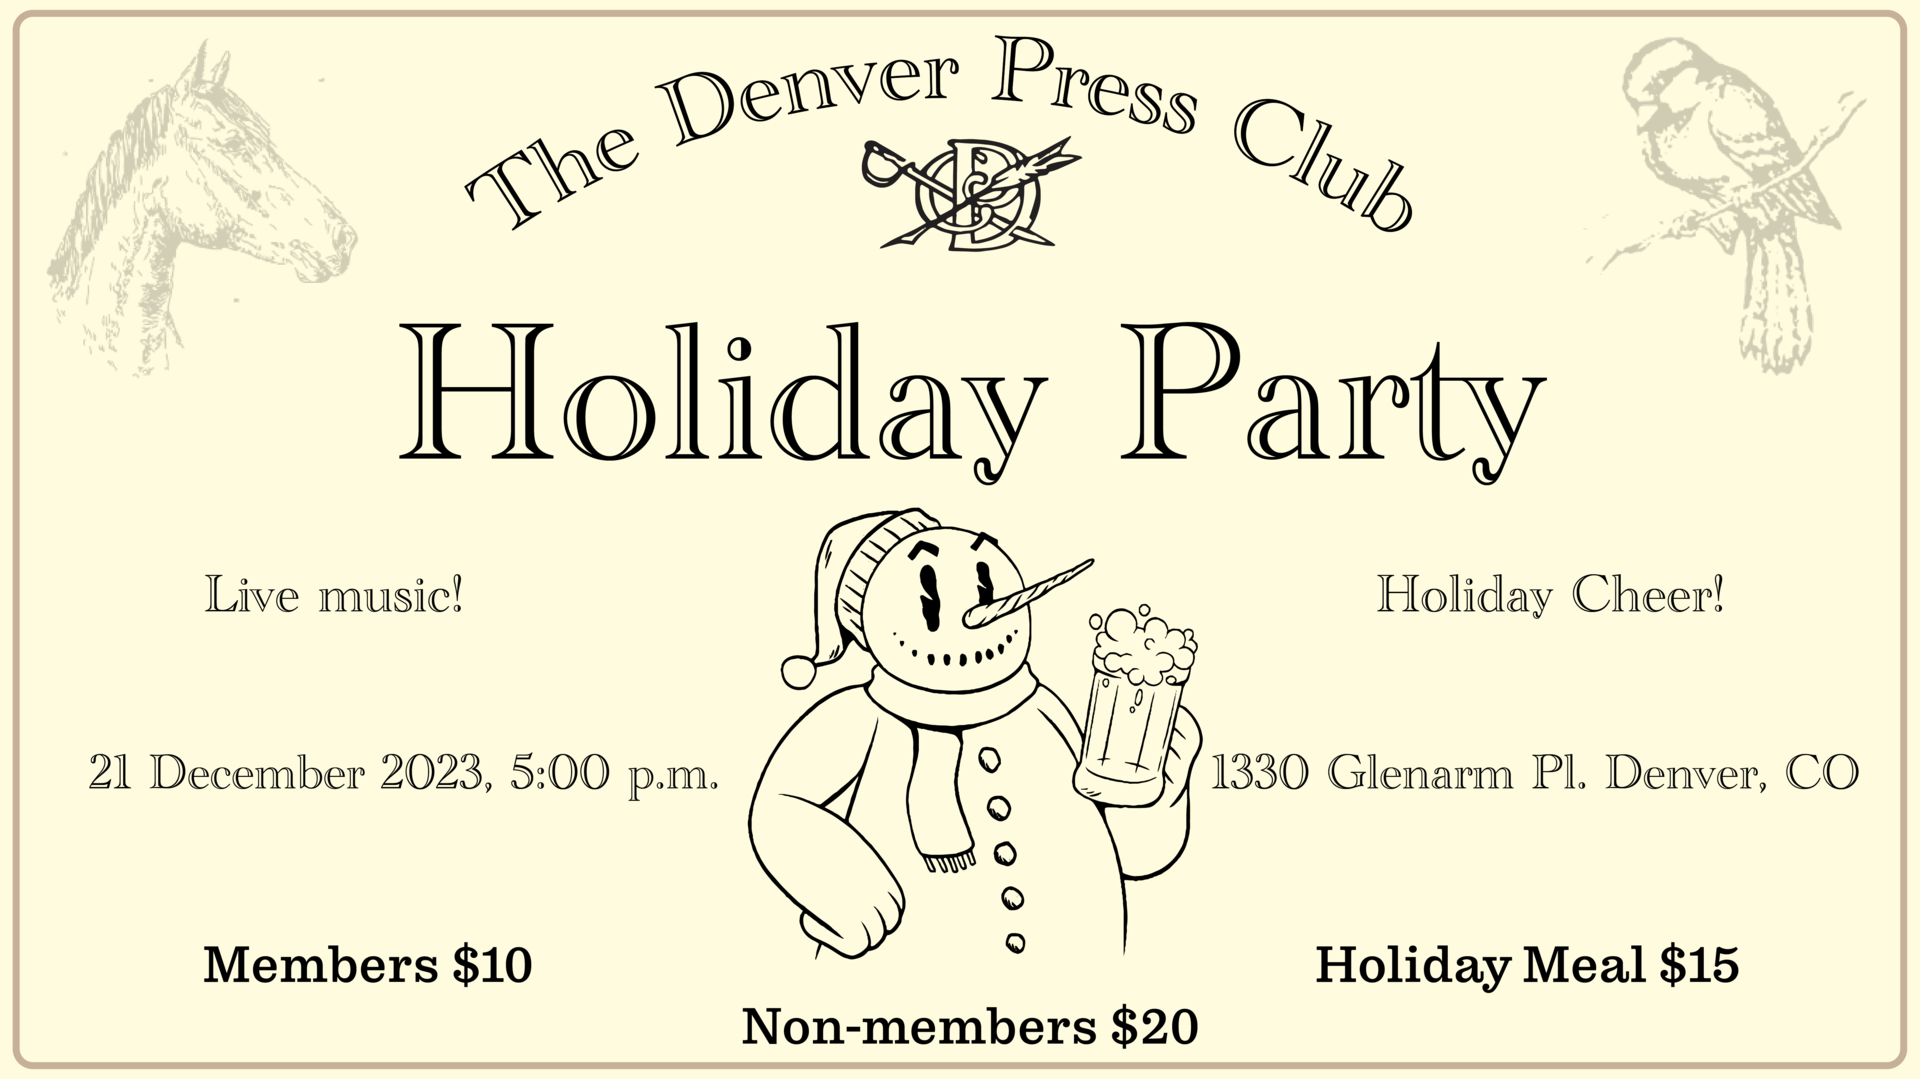  The Denver Press Club presents a Holiday Party